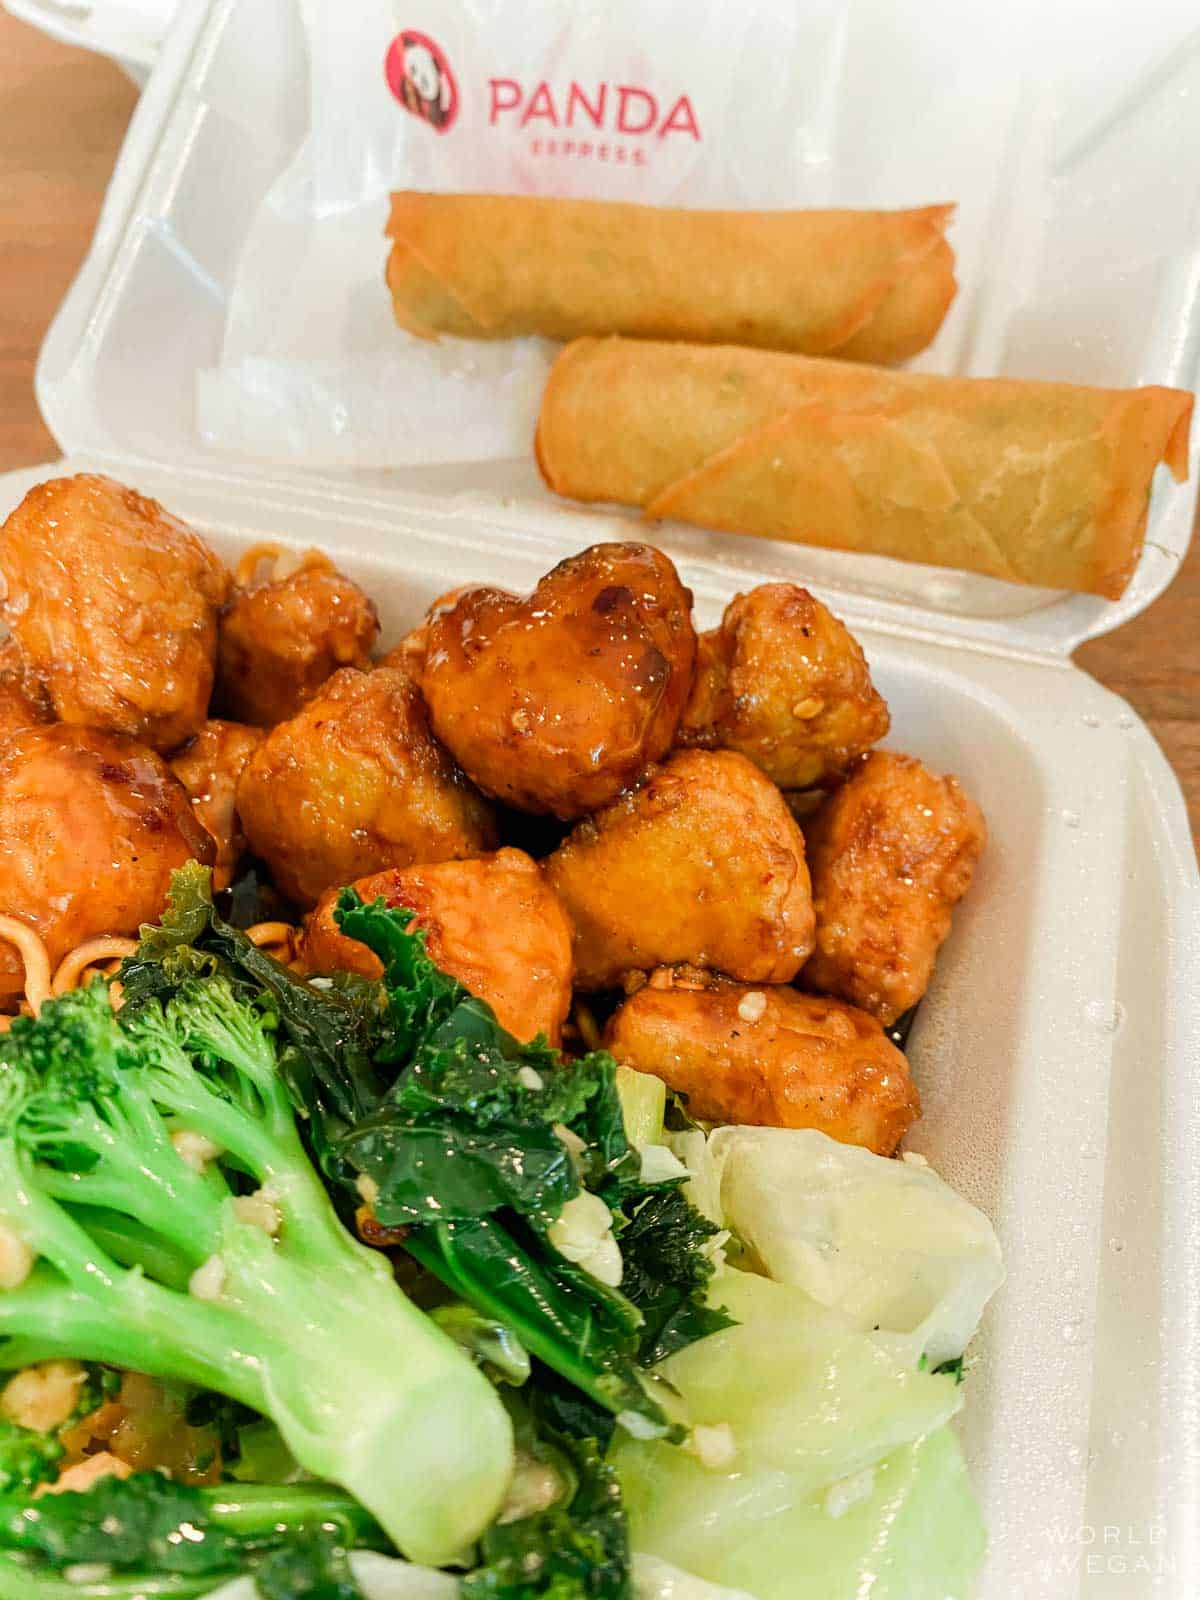 To-go container of vegan Beyond Orange Chicken, spring rolls, and broccoli from panda express. 